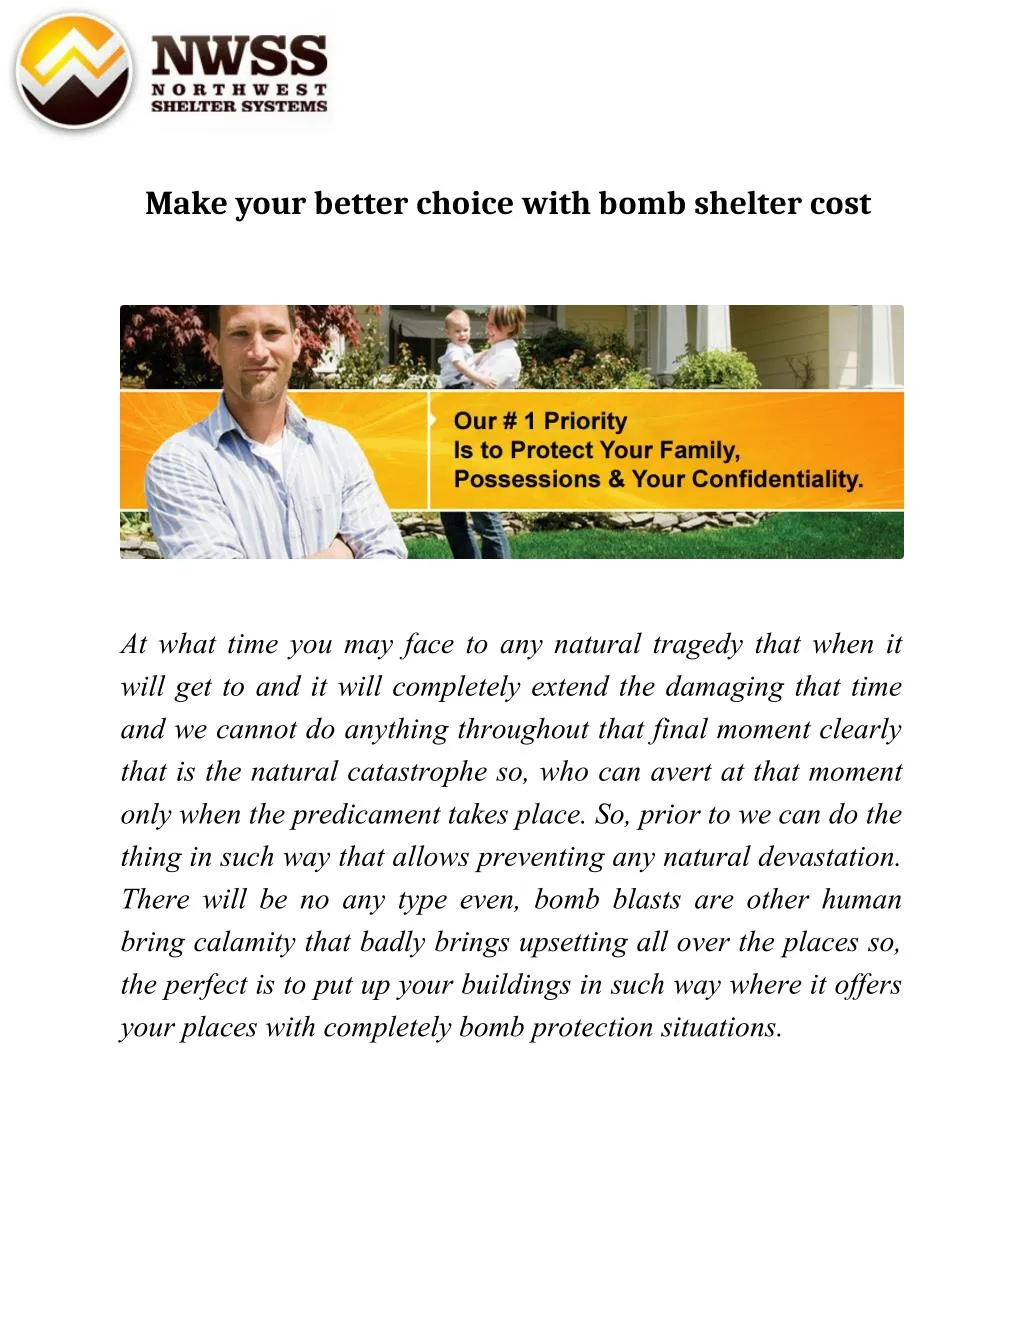 make your better choice with bomb shelter cost n.